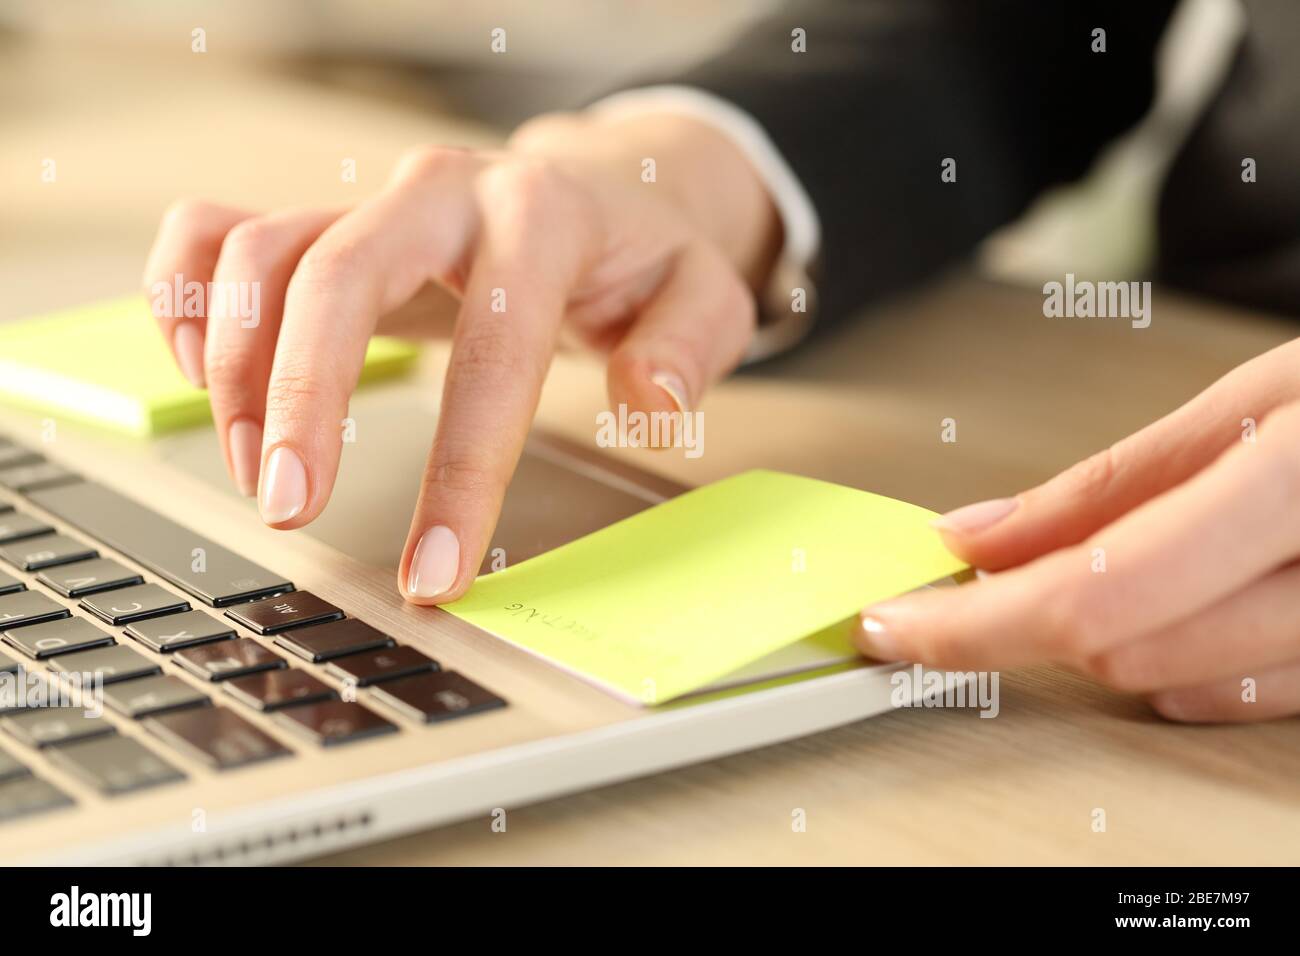 Close up of executive woman hands sticking post note over laptop sitting on a desk Stock Photo